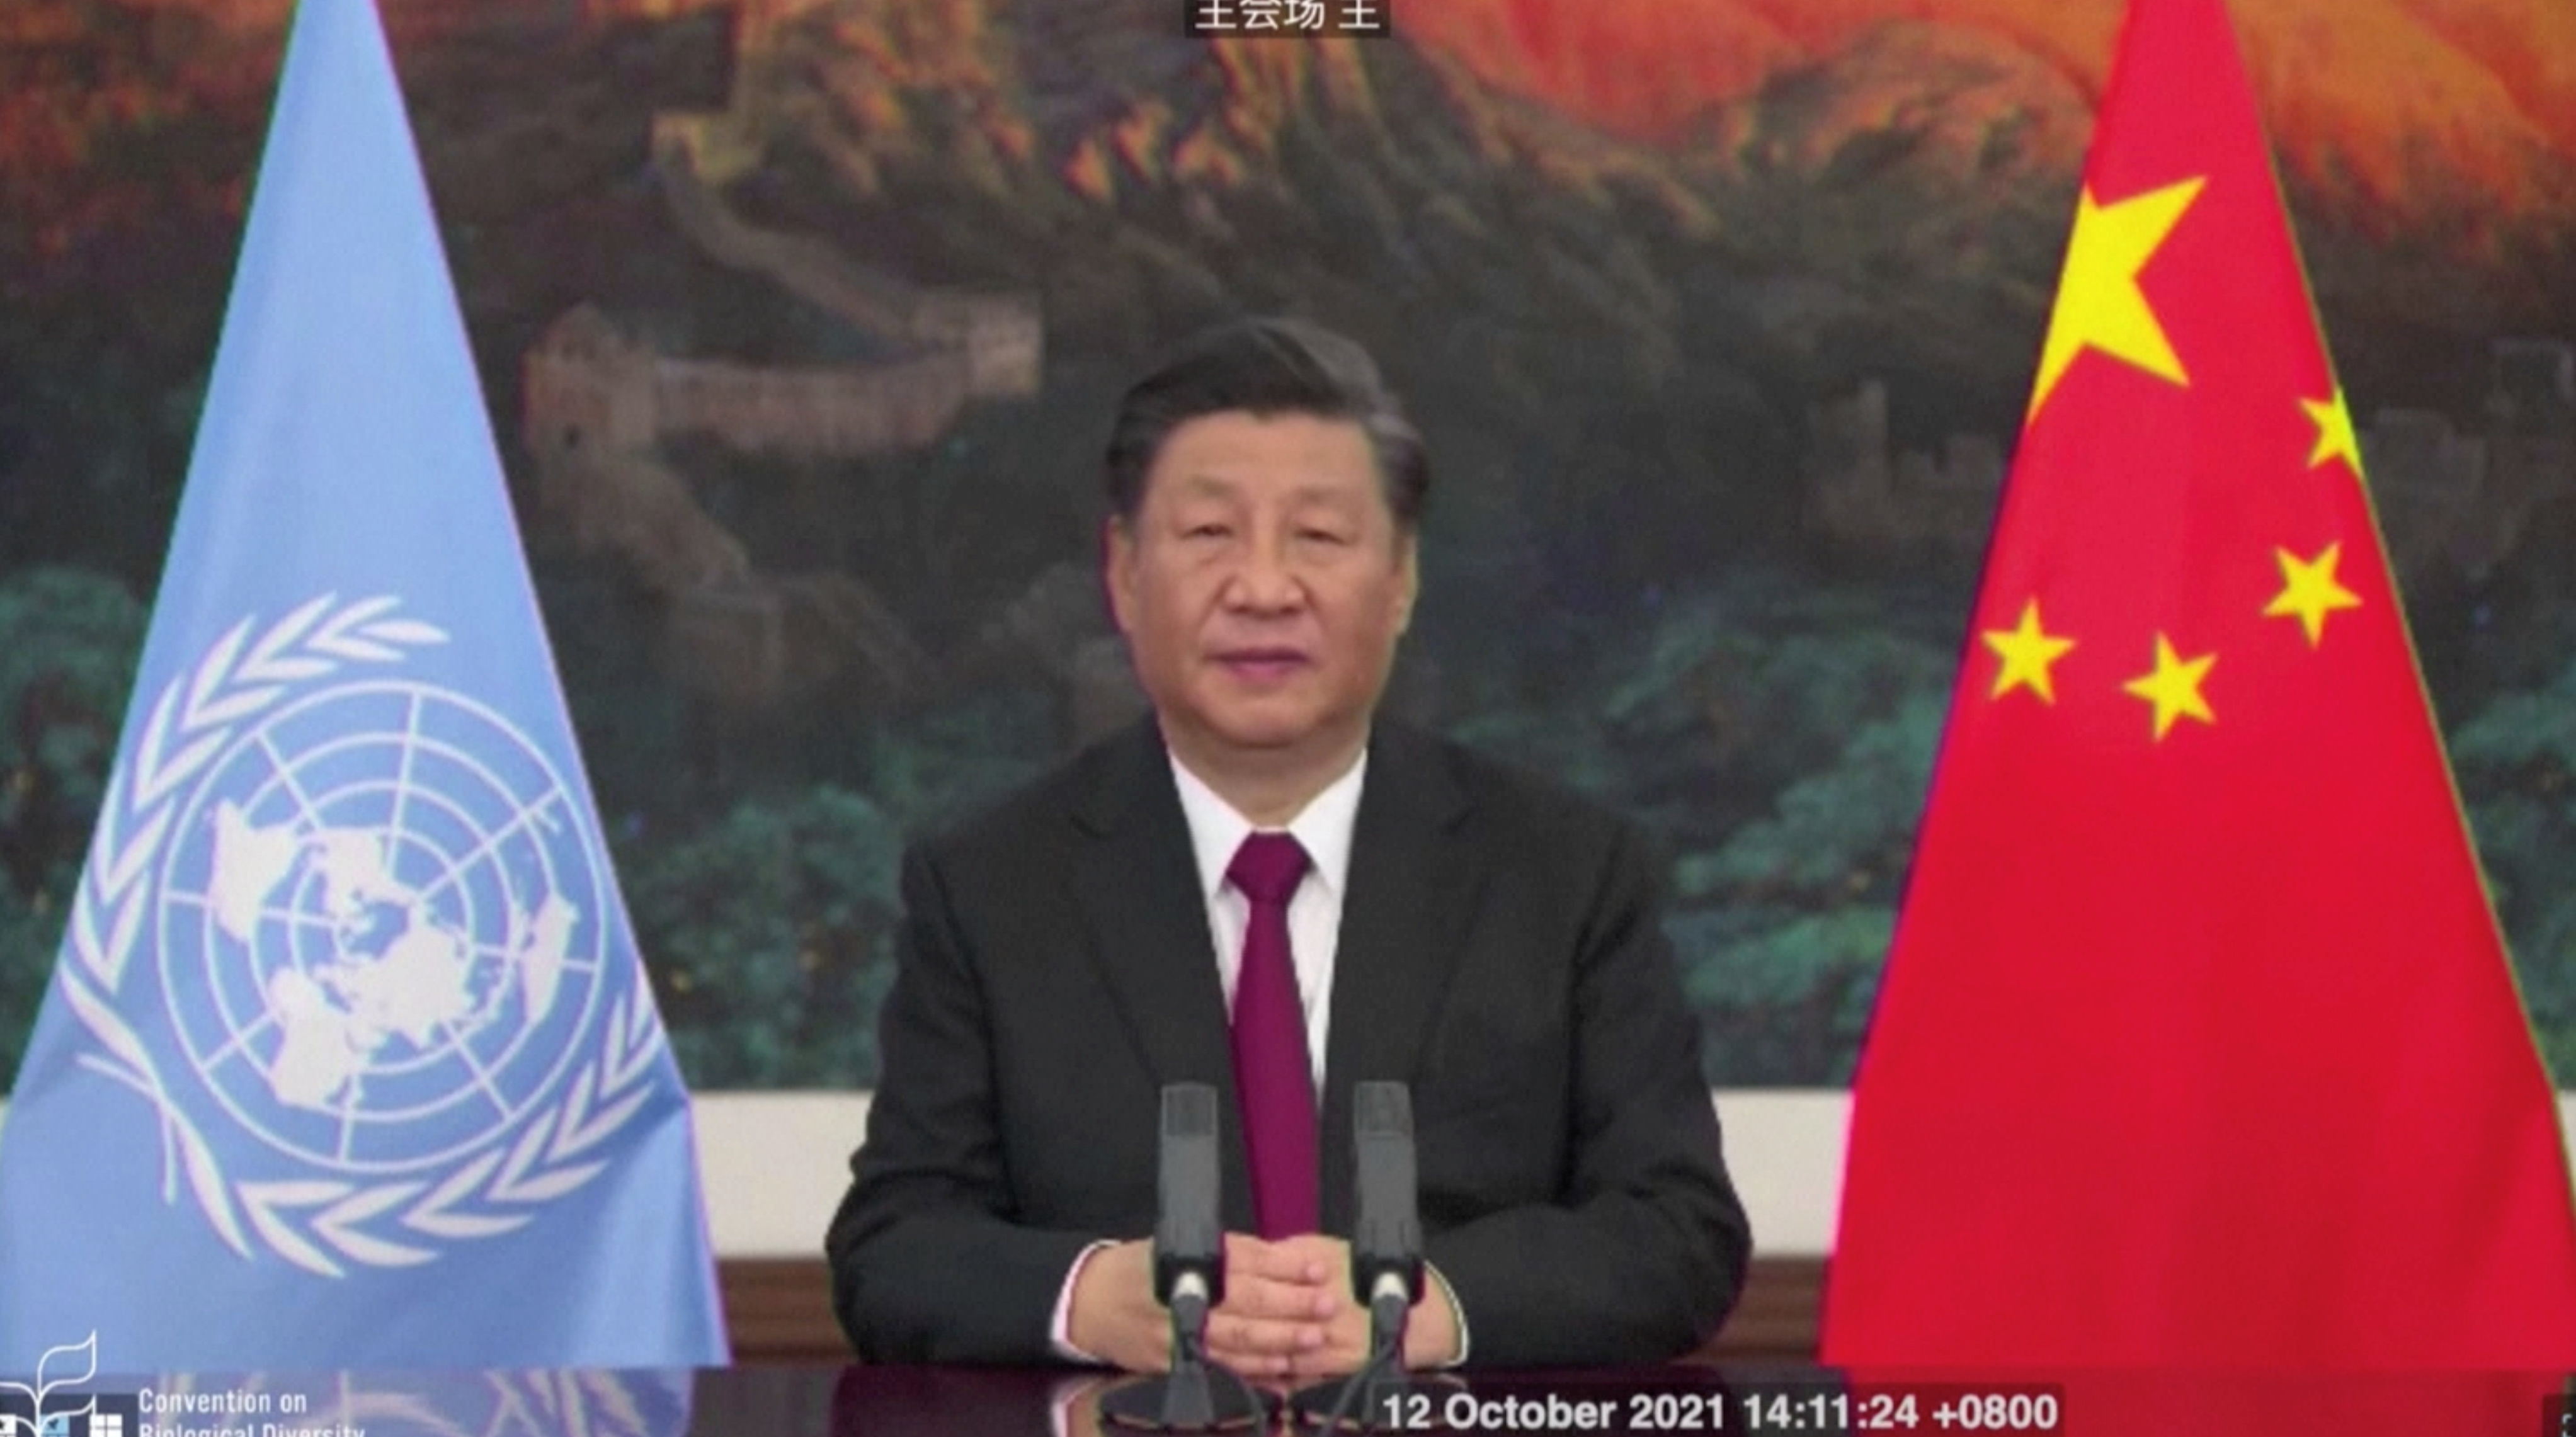 Chinese President Xi Jinping delivers a speech addressing the COP15 biodiversity summit in Kunming